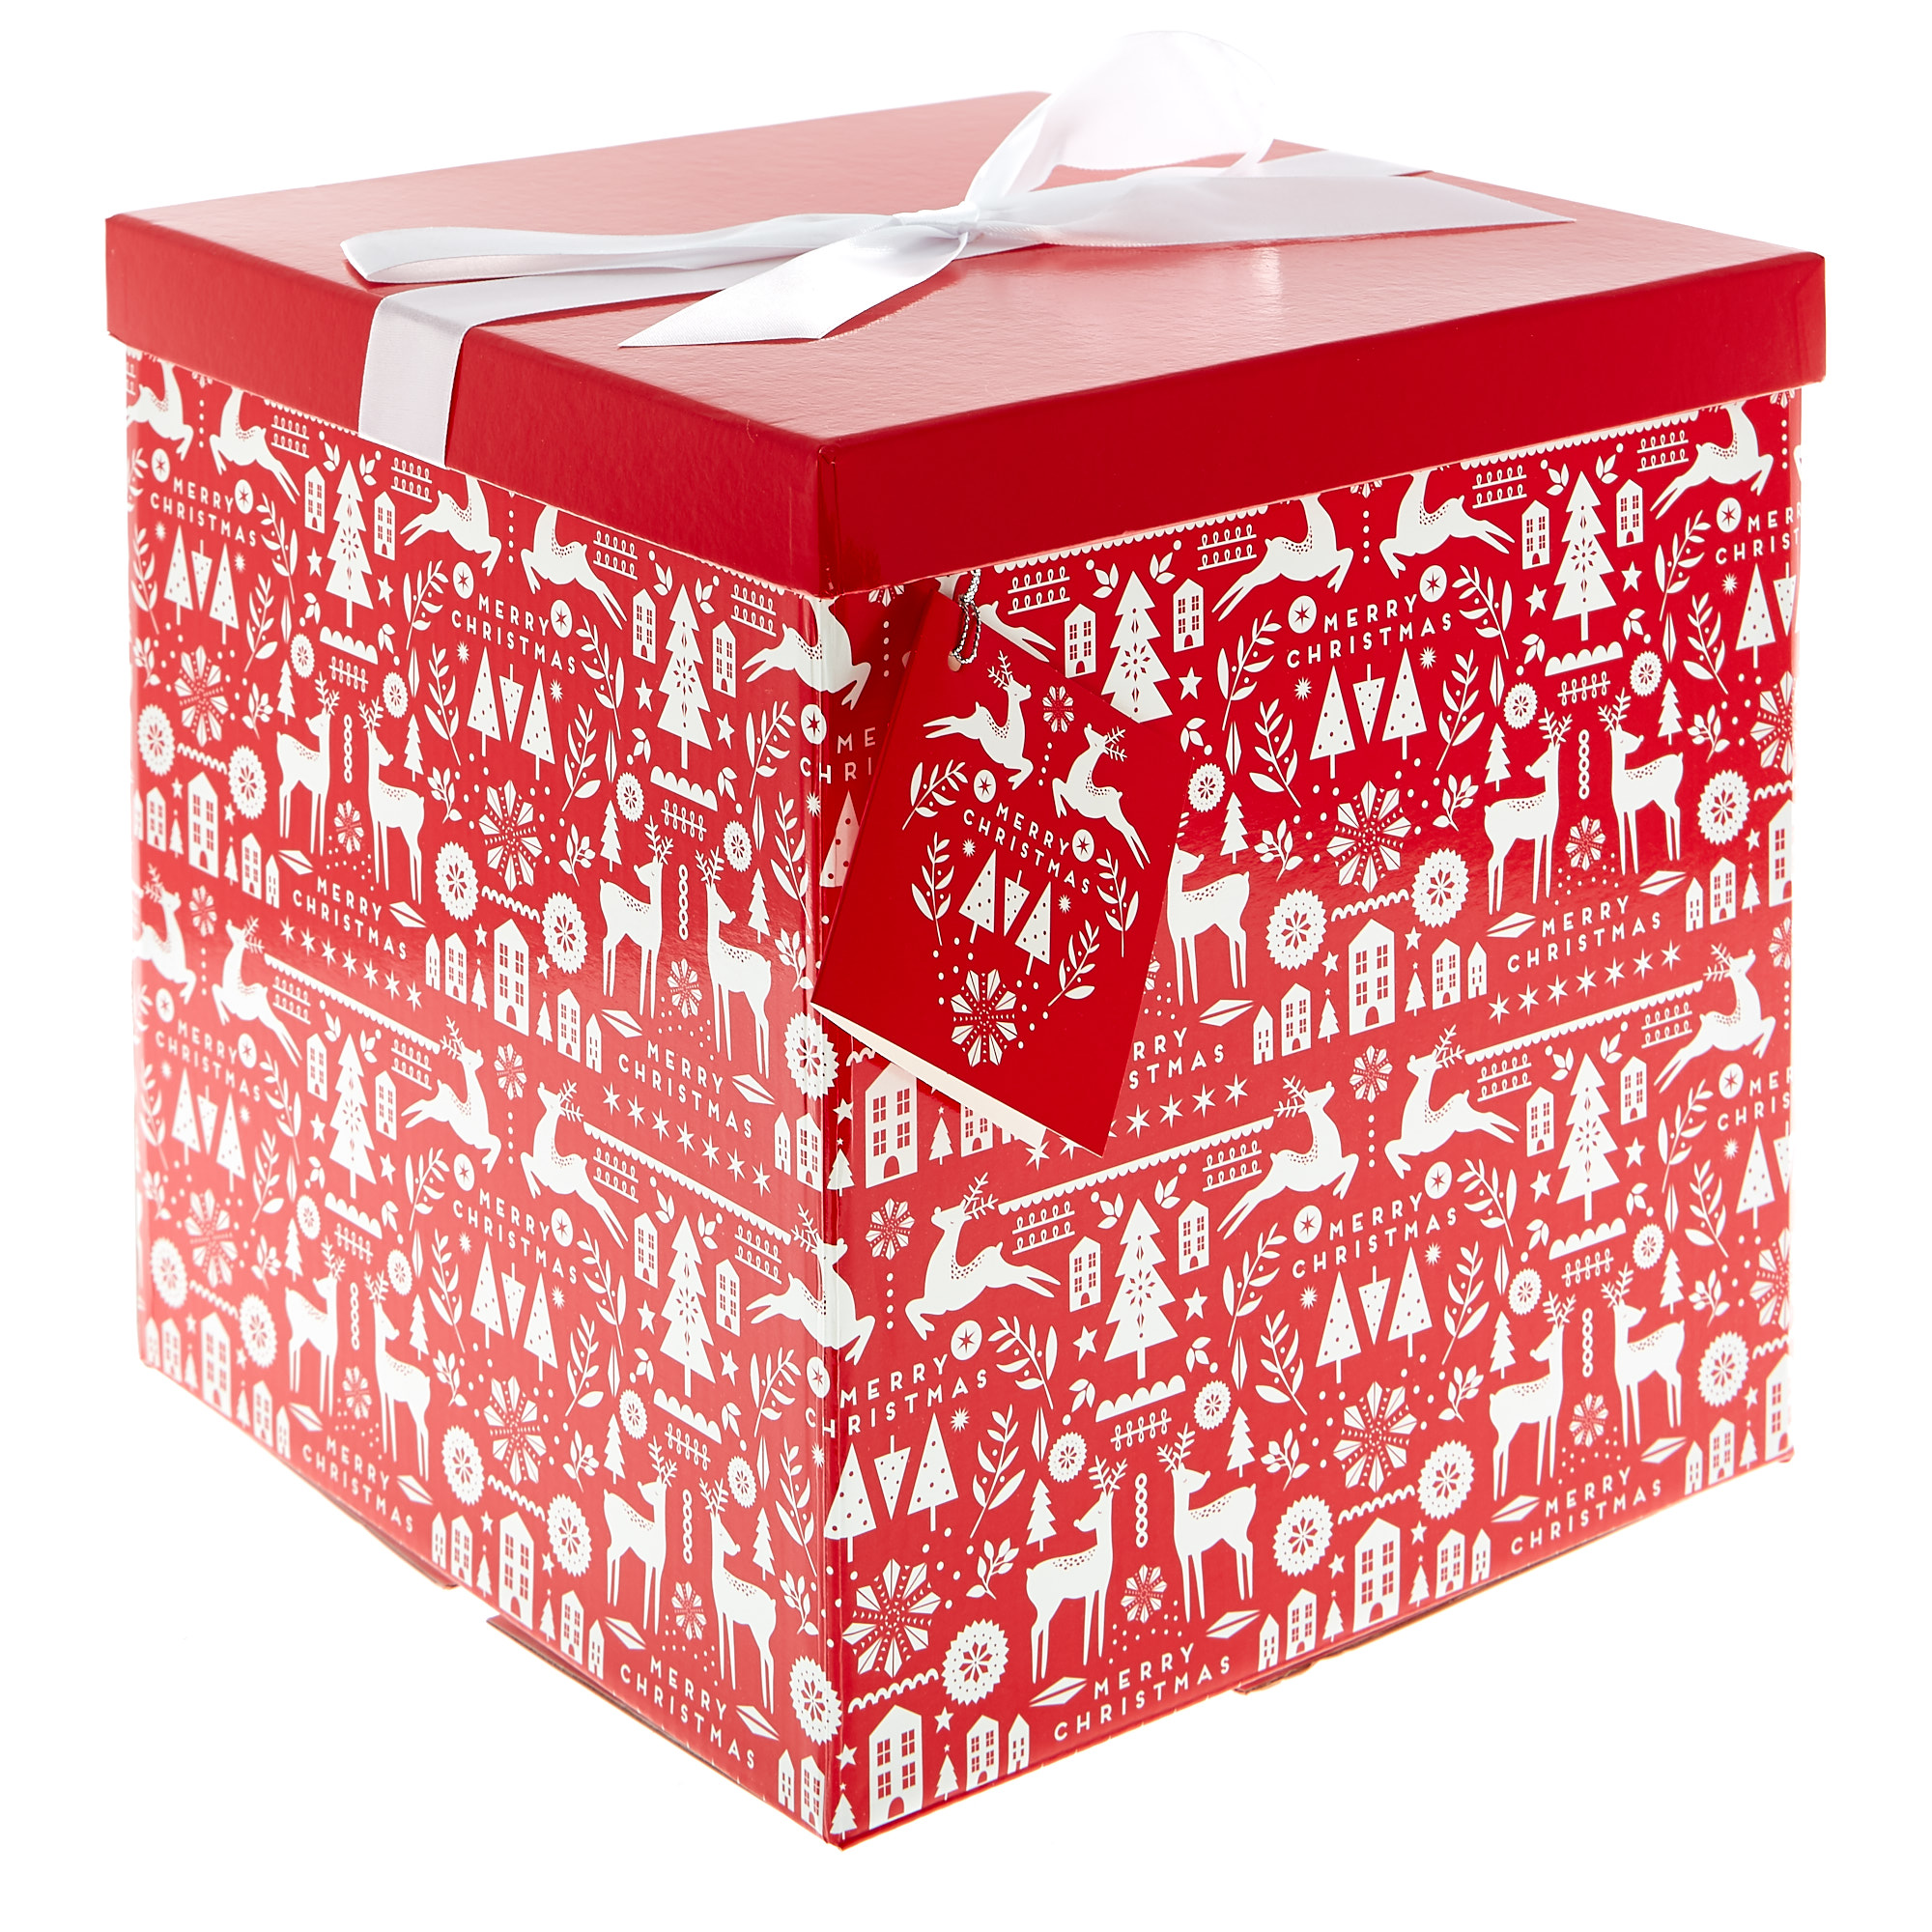 Buy Extra Large Red & White Flat-Pack Christmas Gift Box for GBP 1.99